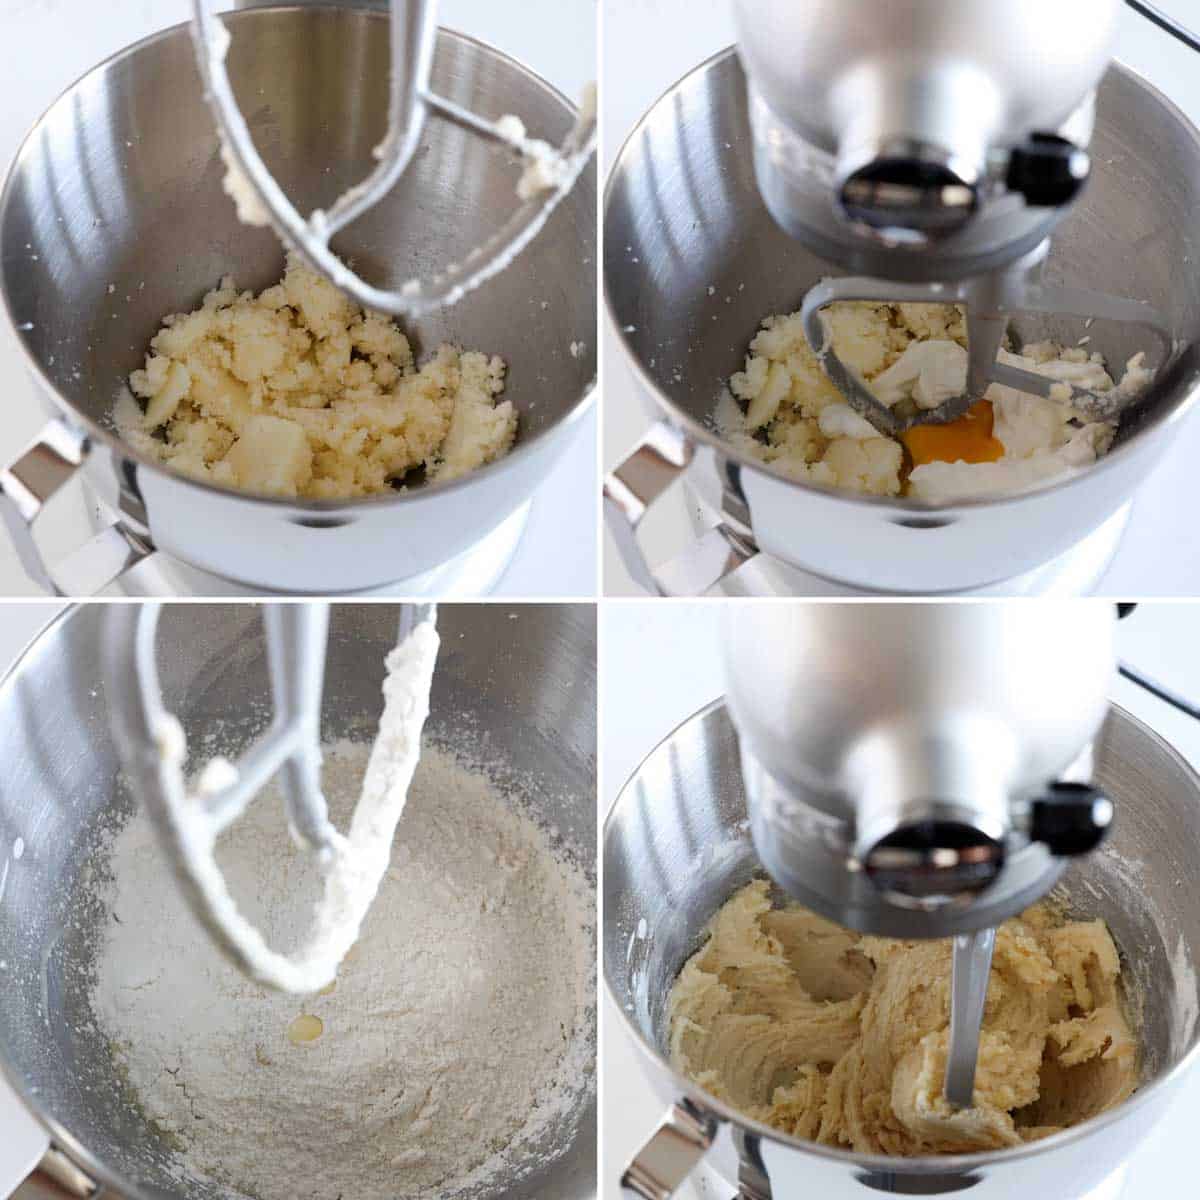 Steps to make the dough for sour cream cookies.